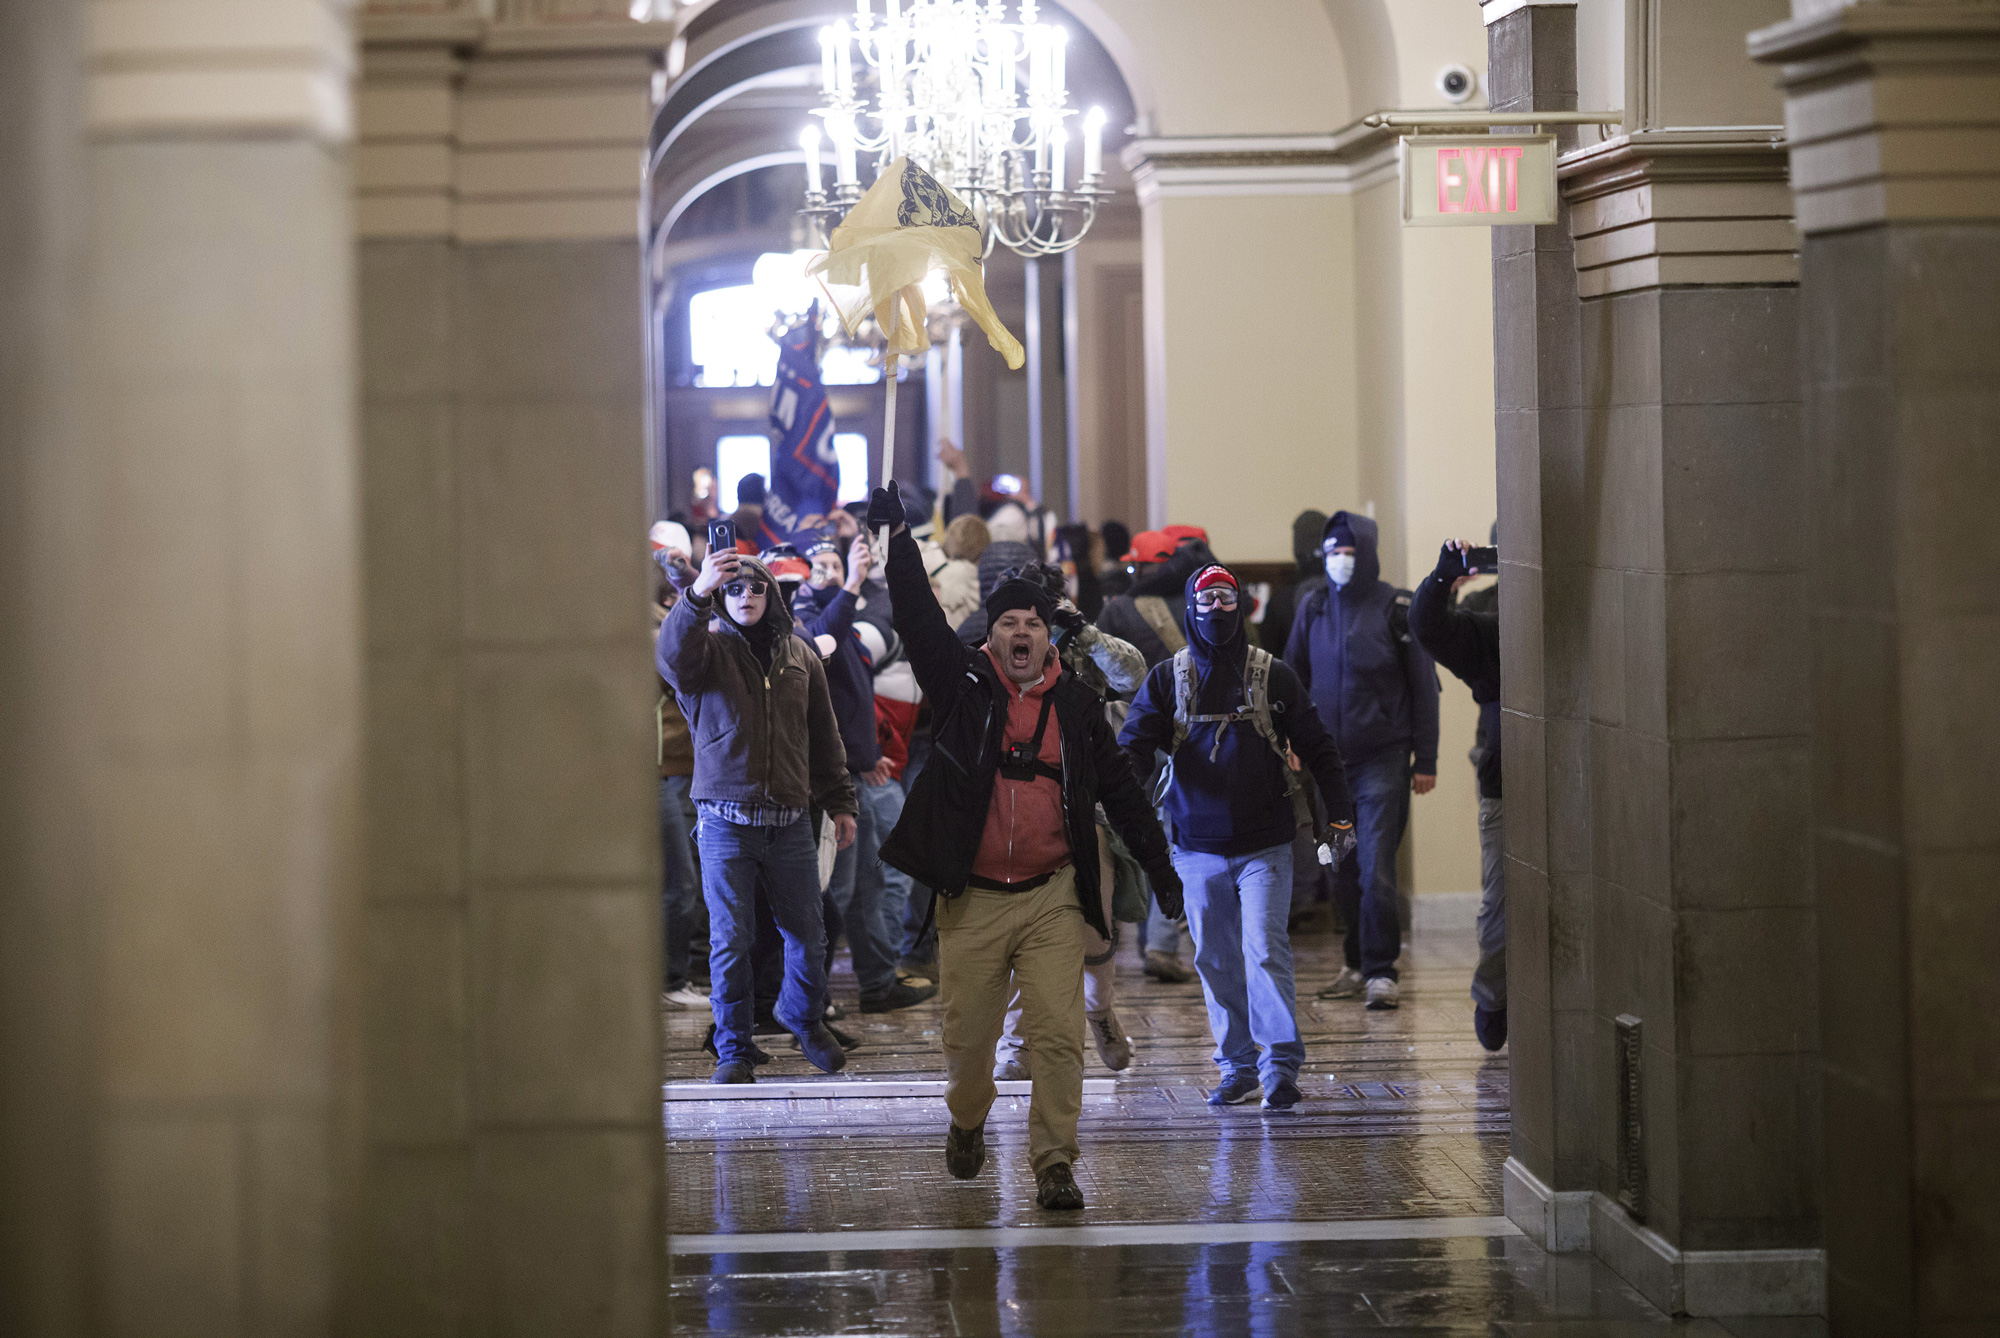 Demonstrators breaches barricades to enter the U.S. Capitol during a protest at the Ellipse in Washington, D.C., on January 6. 